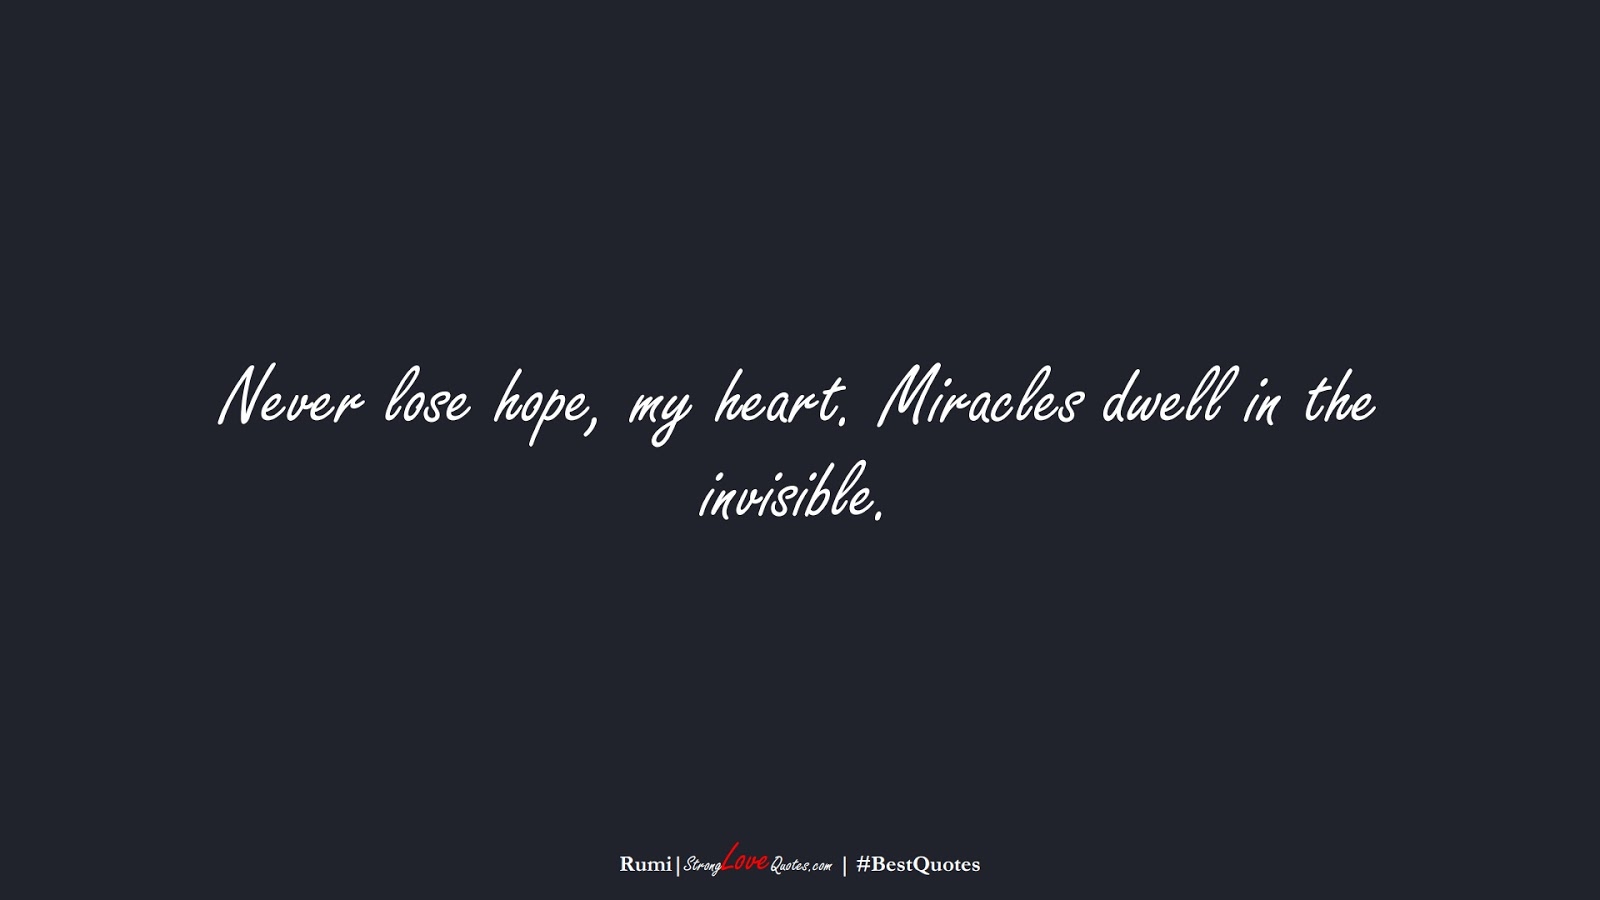 Never lose hope, my heart. Miracles dwell in the invisible. (Rumi);  #BestQuotes